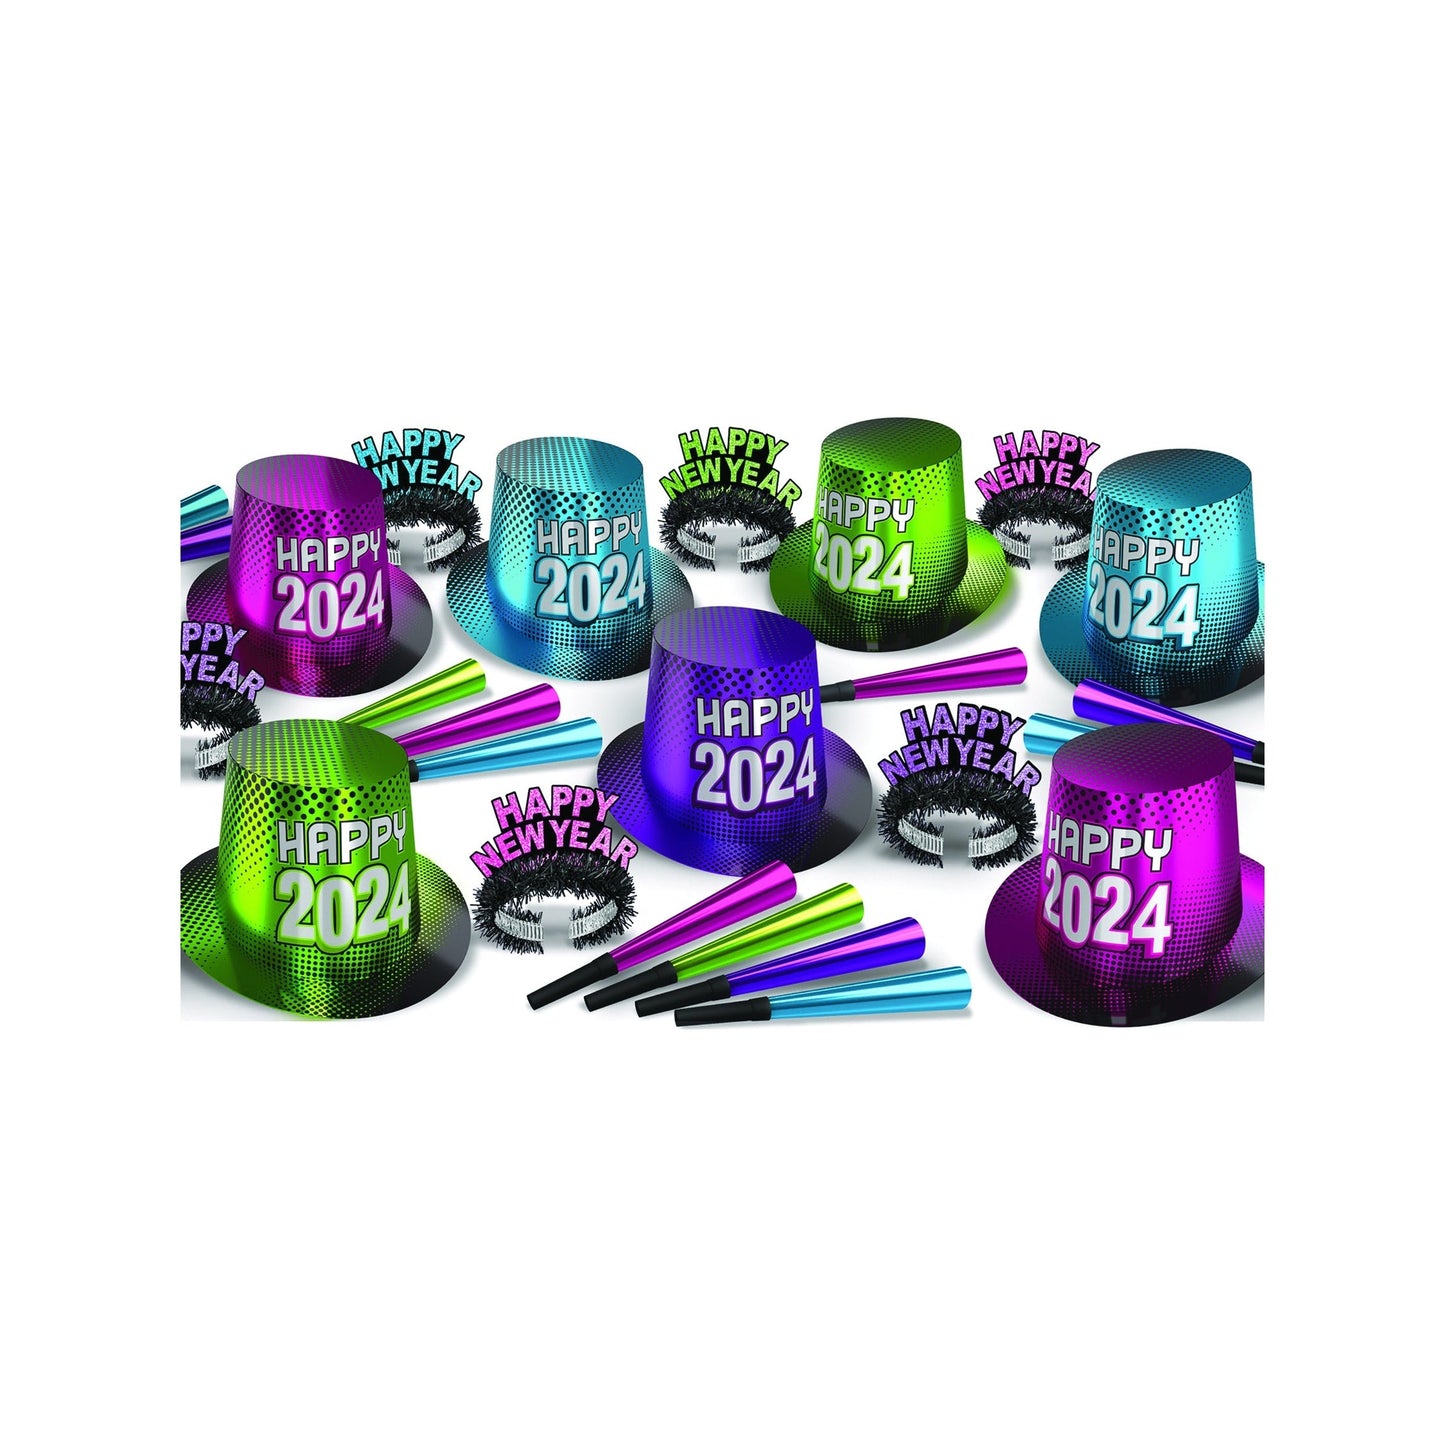 New Year "2024" Assortment for 50